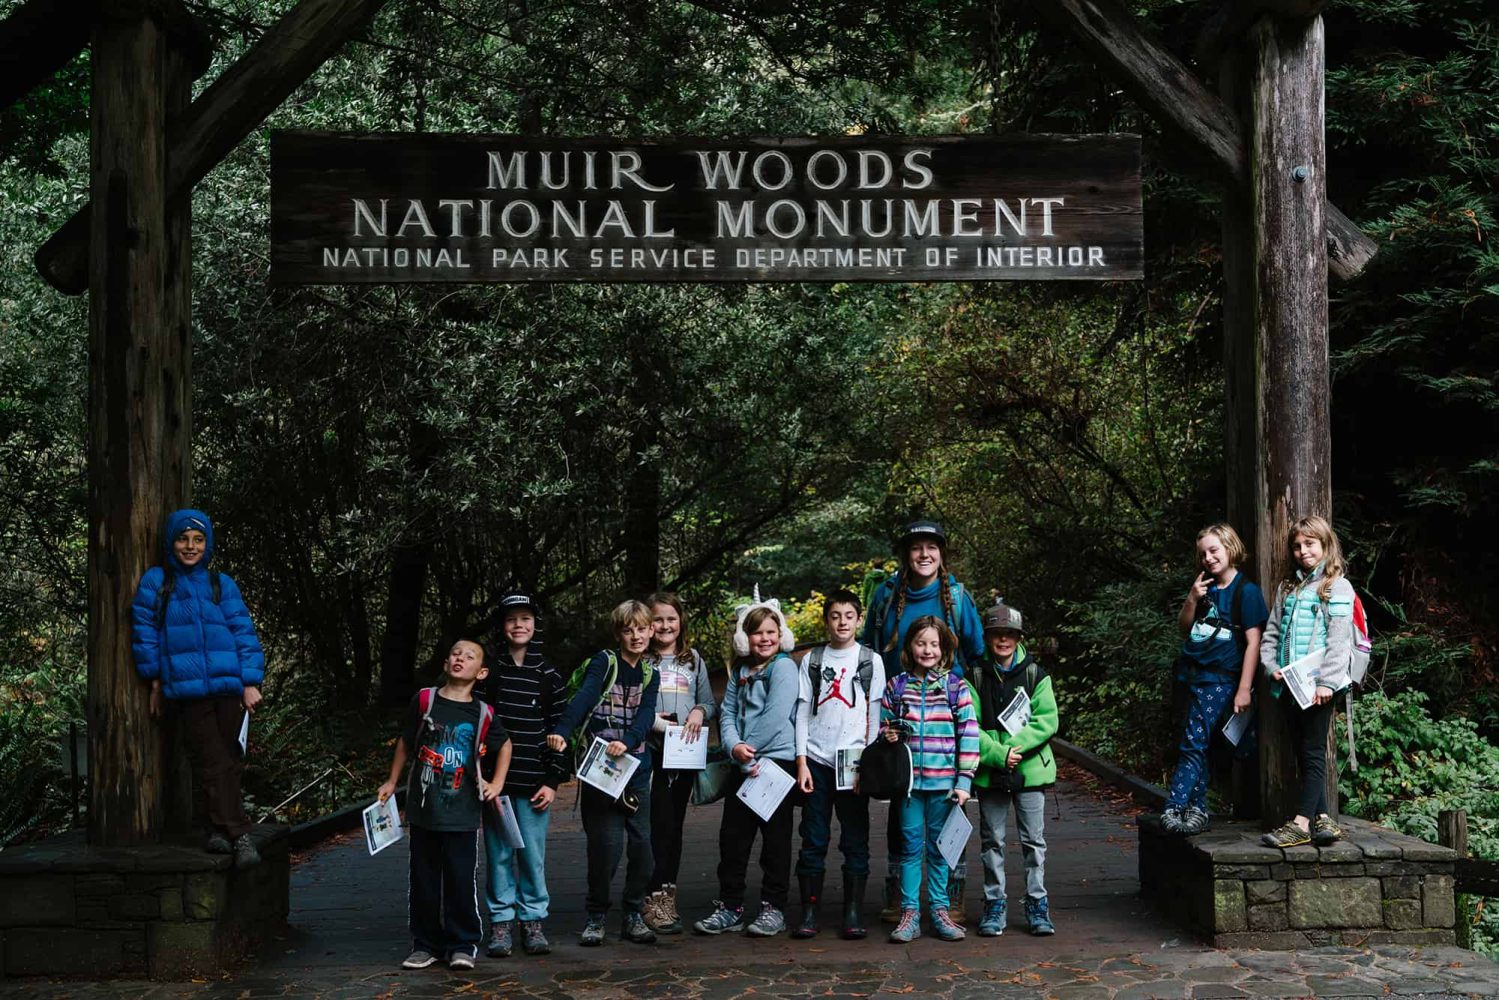 4th graders in front of the muir woods national monument